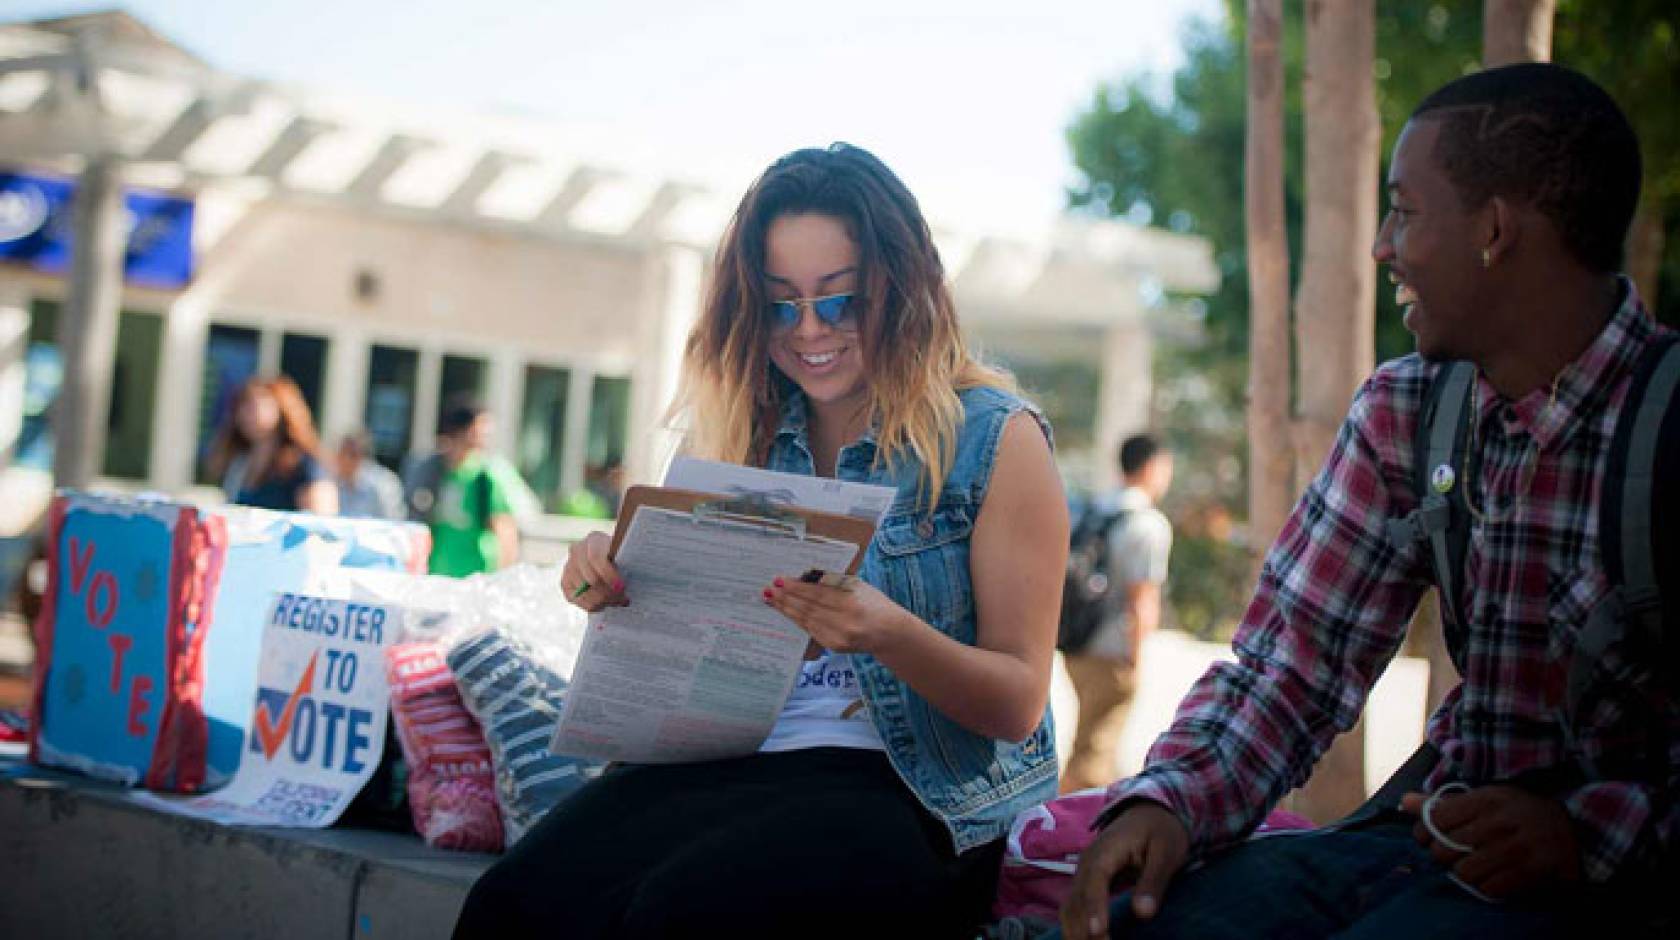 Student registers someone to vote at UC San Diego